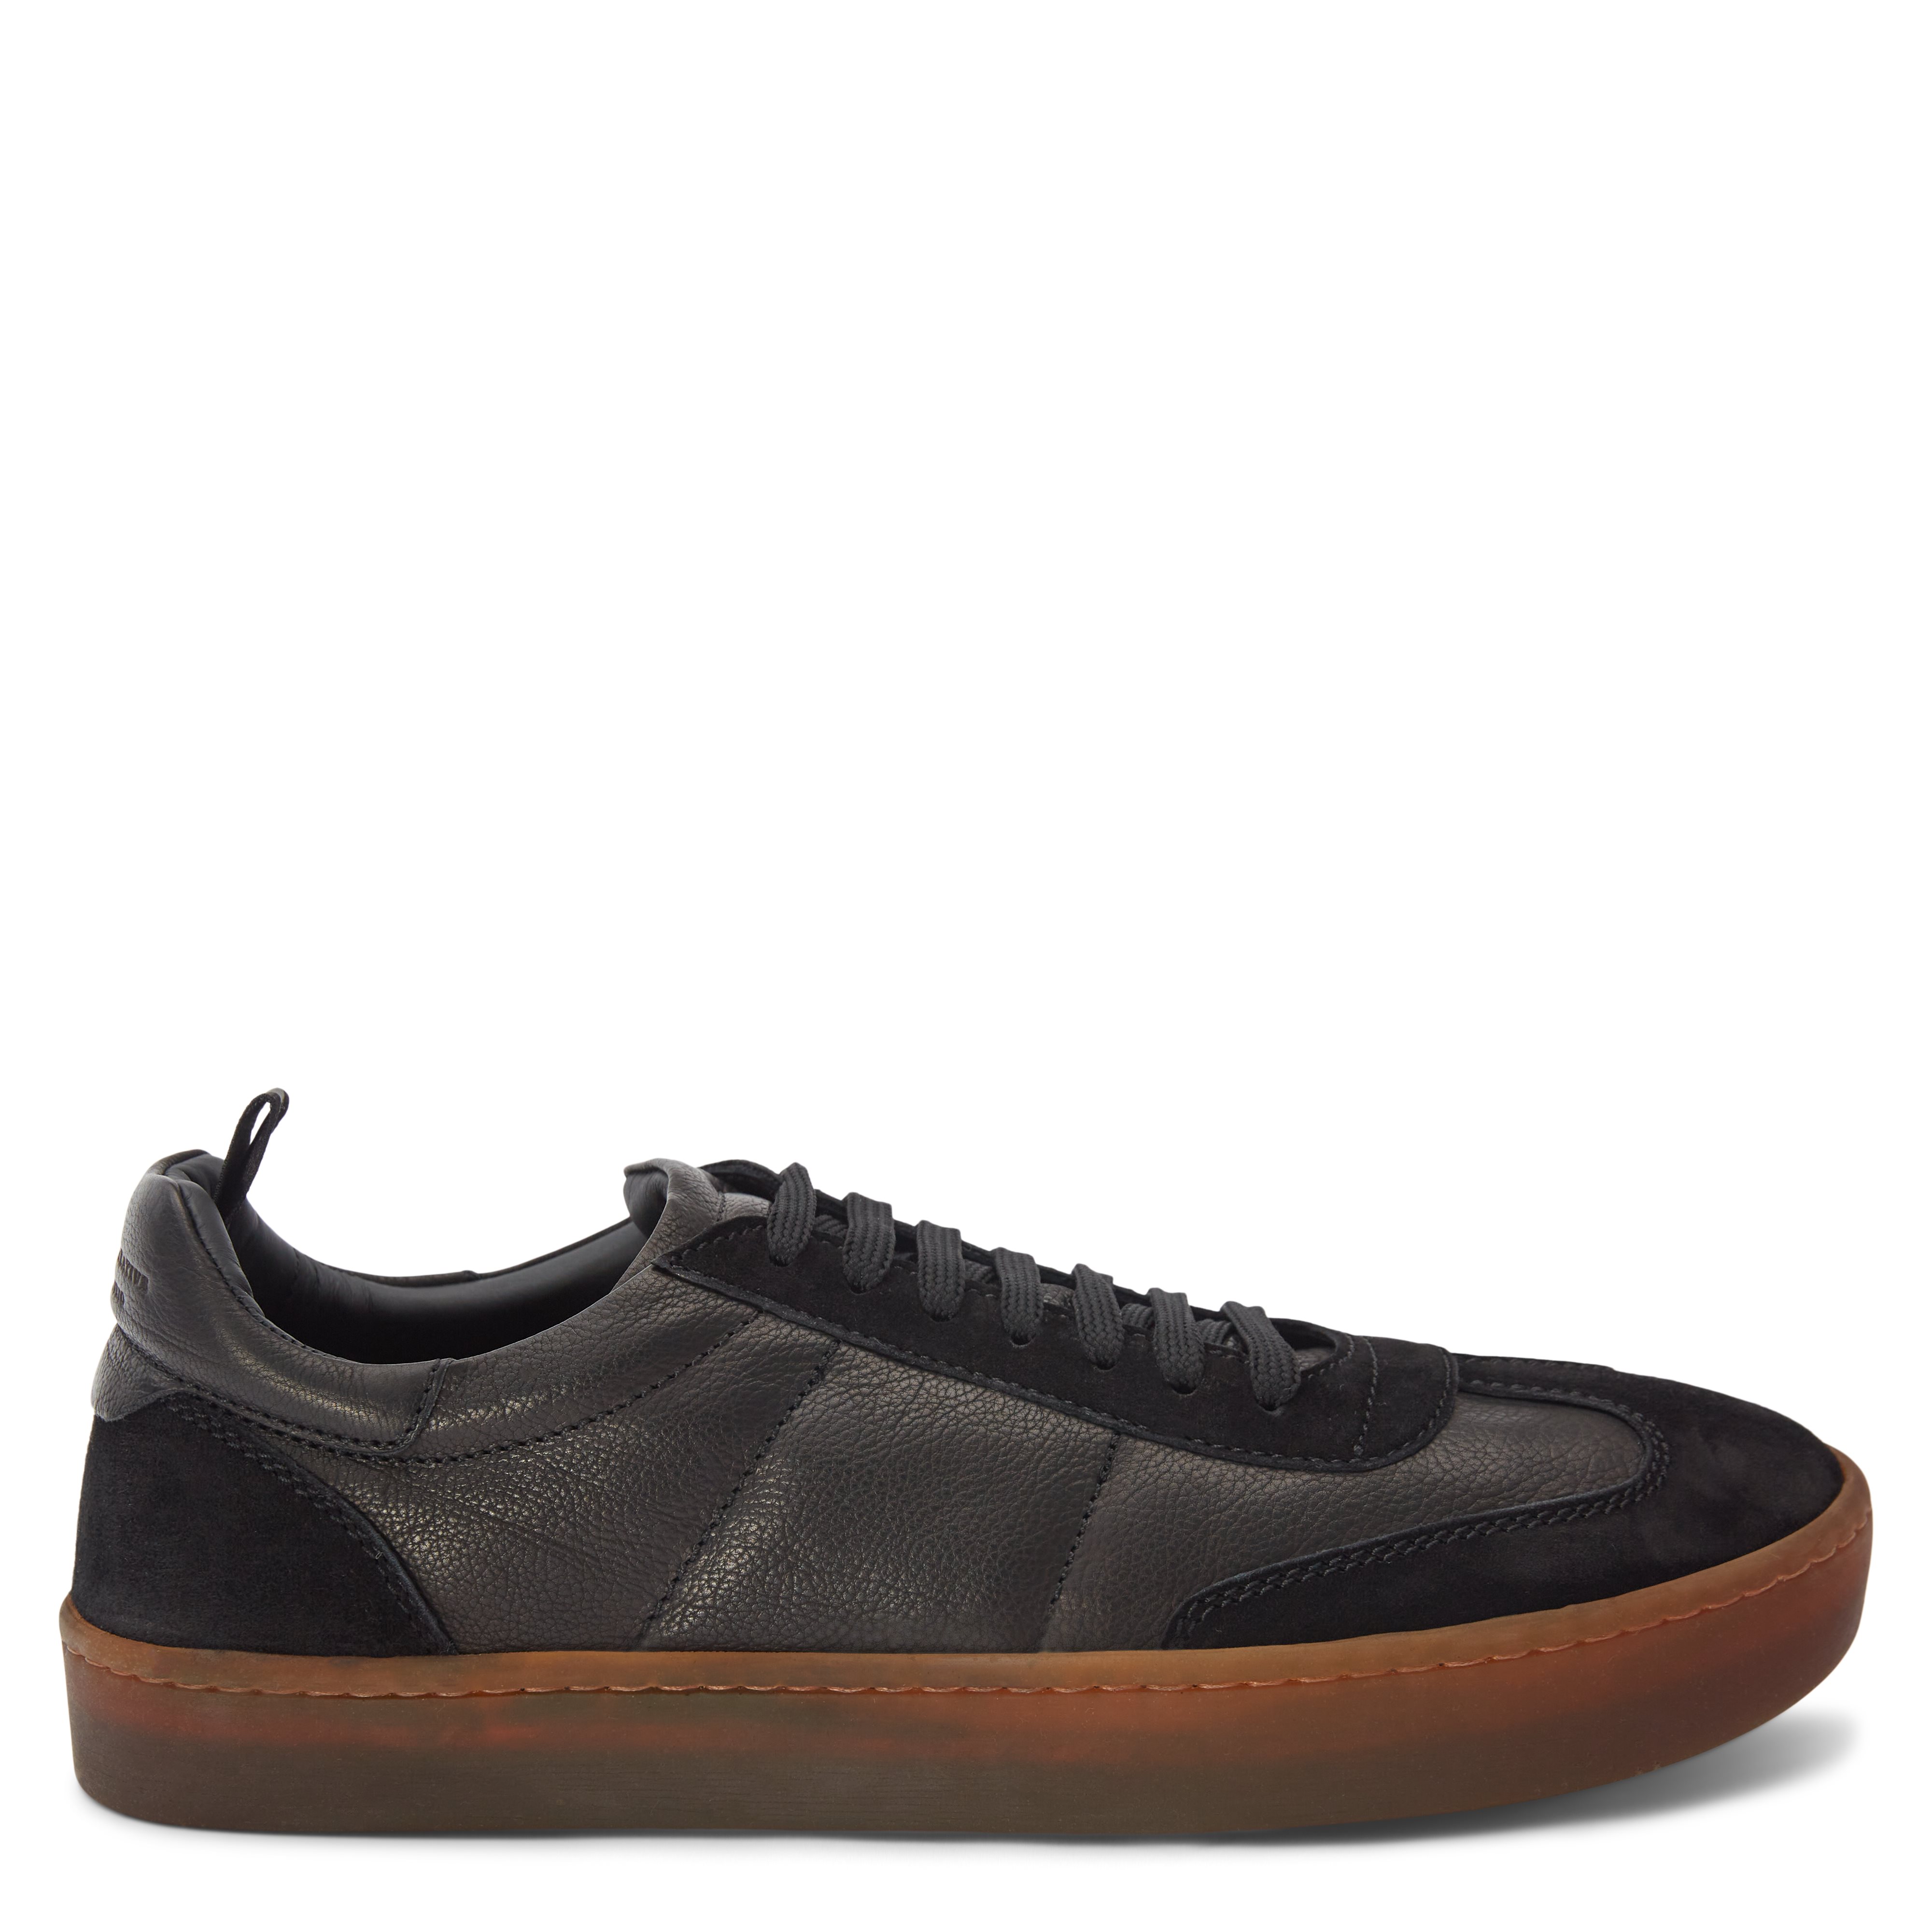 Officine Creative Shoes KOMBINED/001 OLIVER/GIANO Black